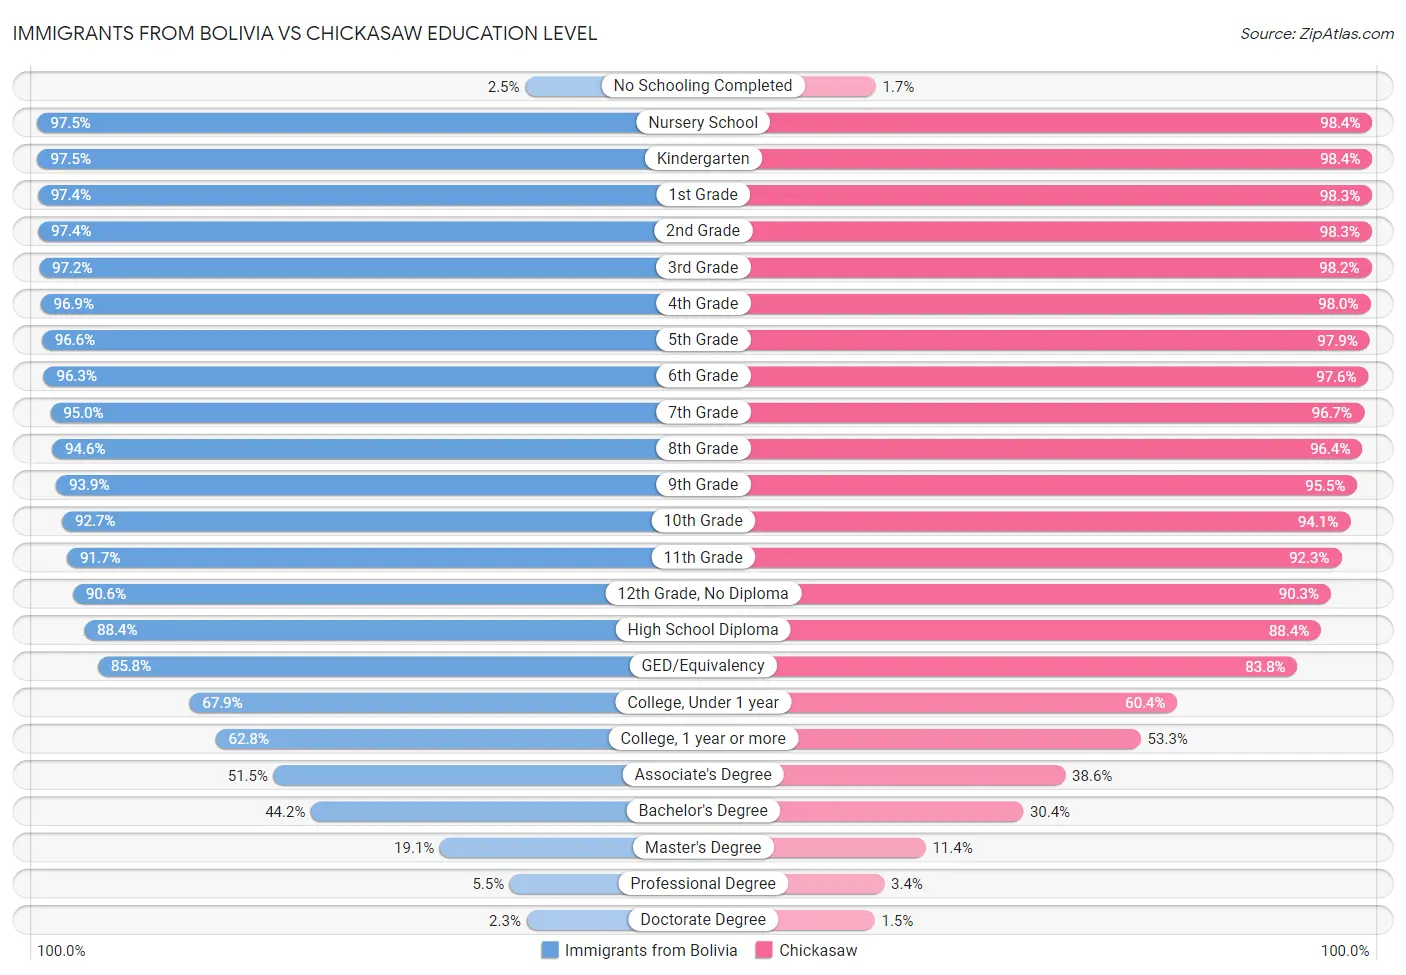 Immigrants from Bolivia vs Chickasaw Education Level